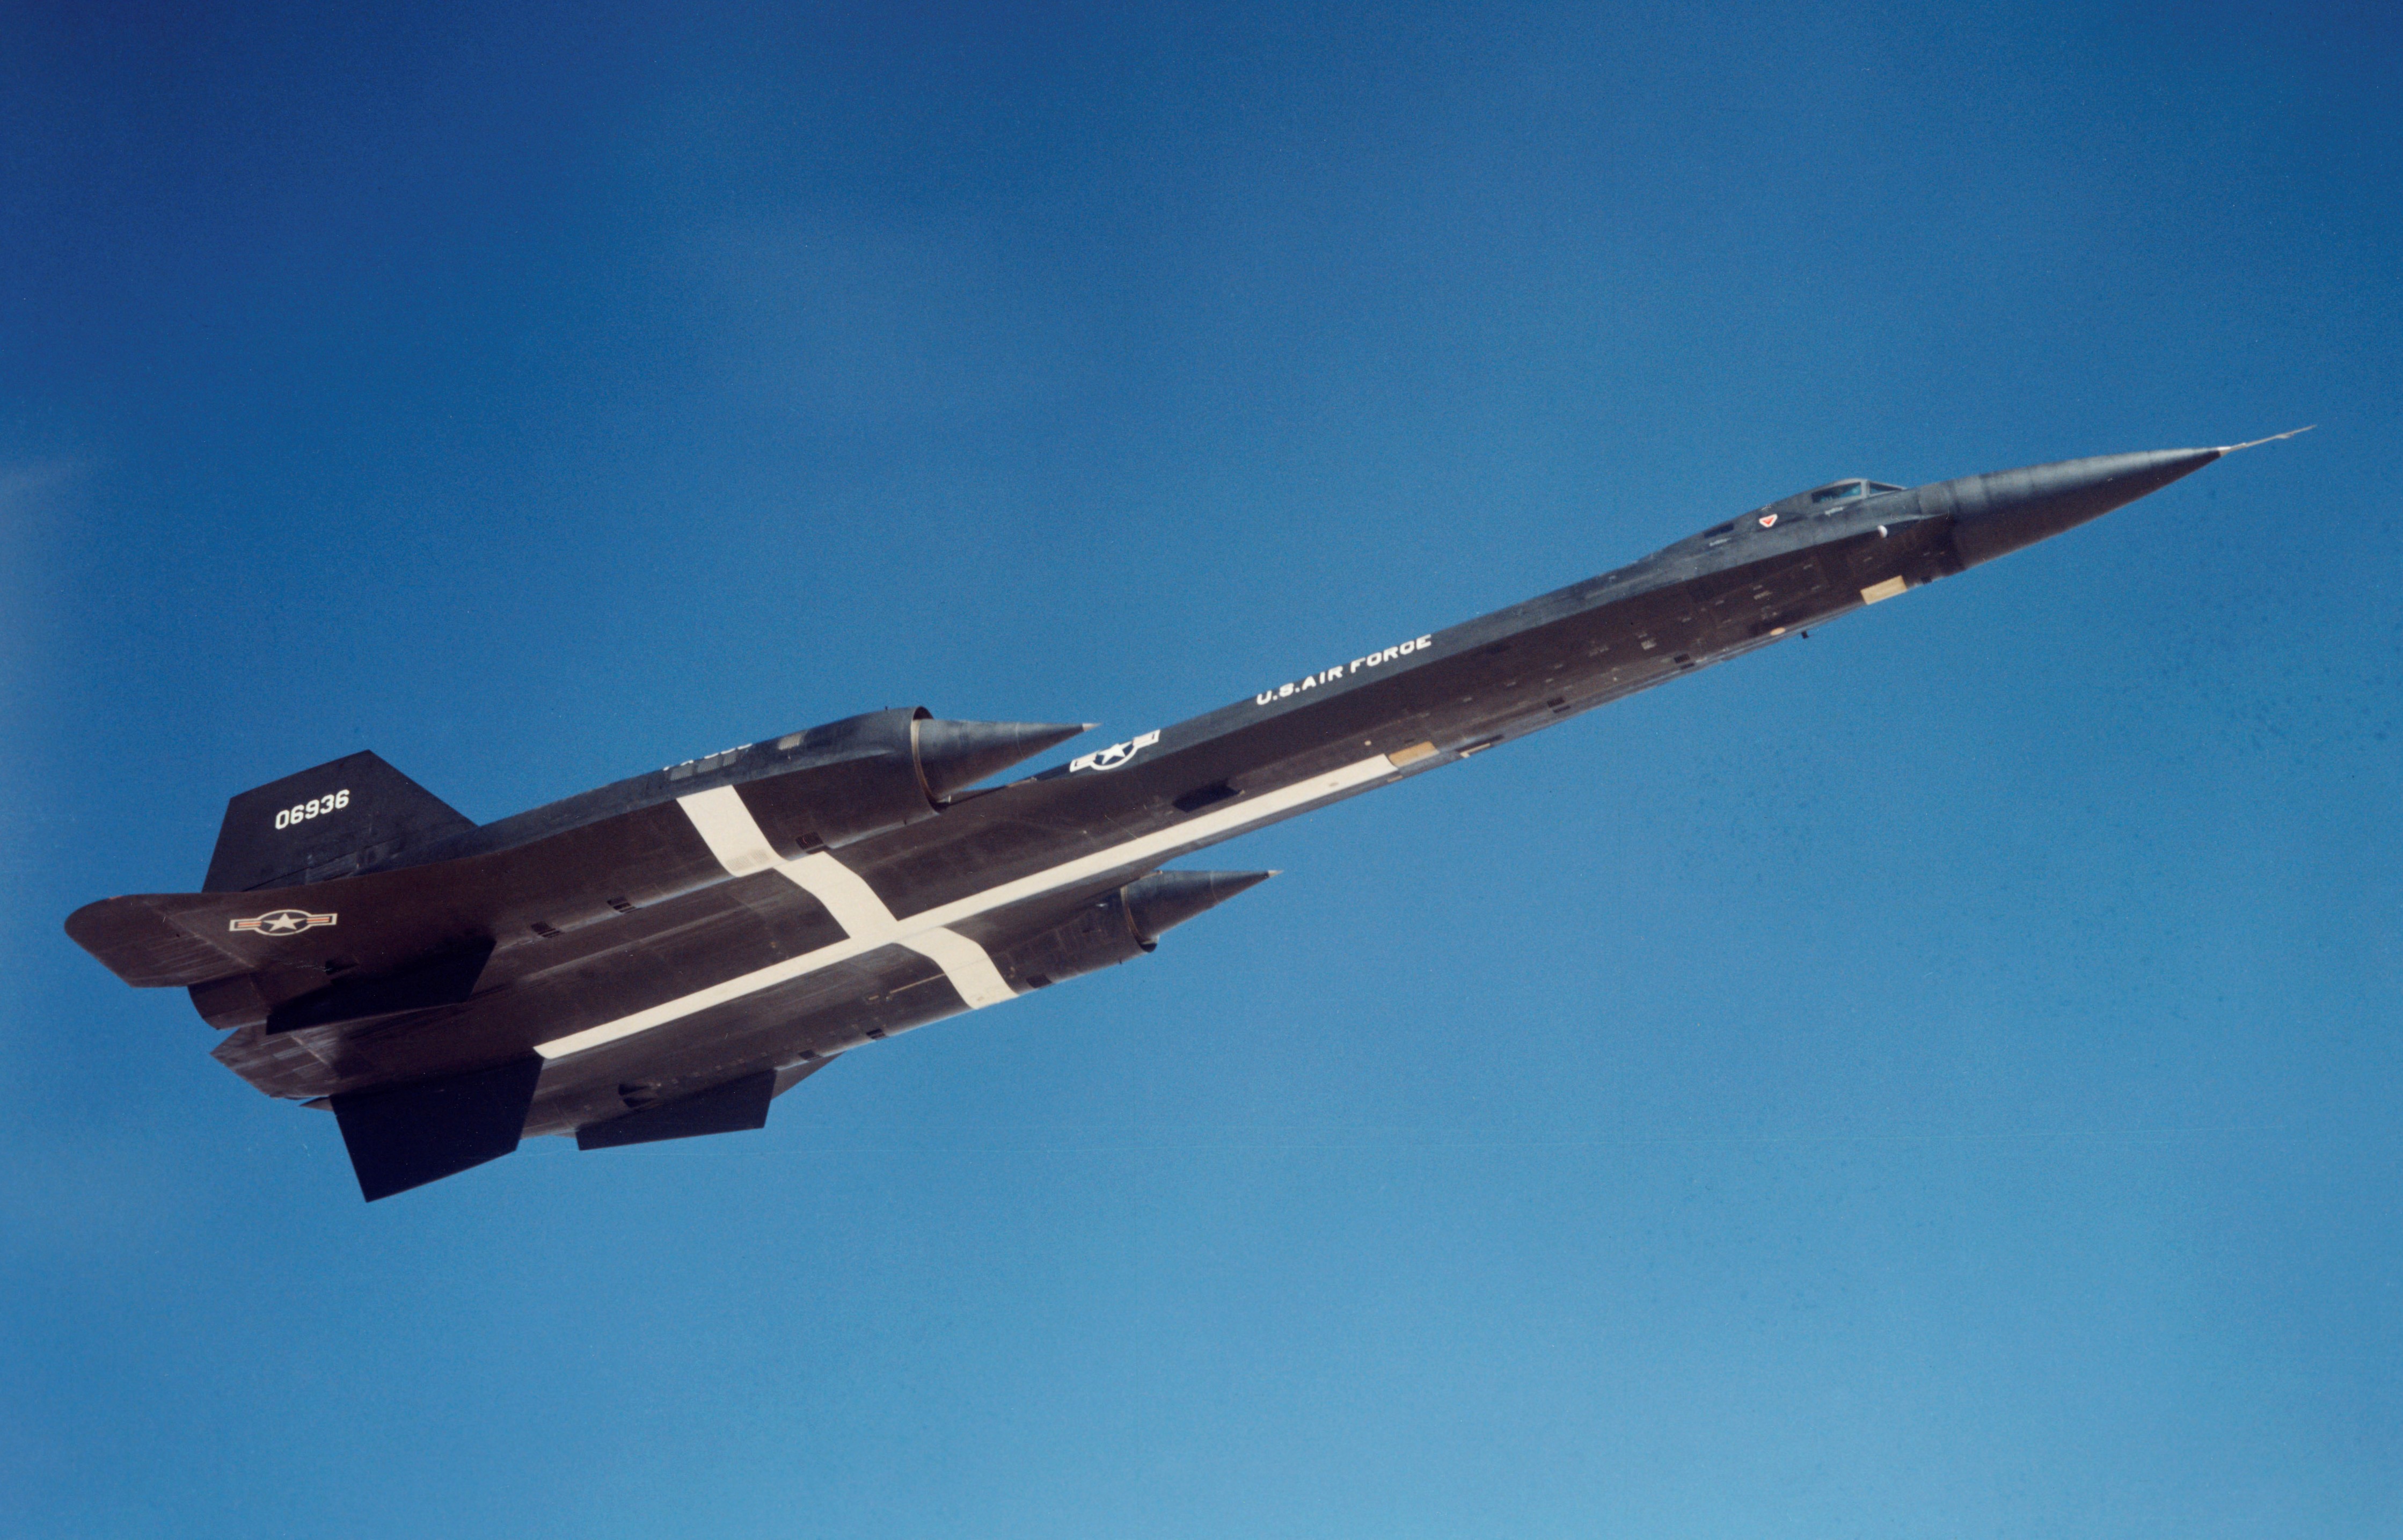 The third YF-12a departs Edwards AFB in 1965. The white cross painted on the lower fuselage assisted in tracking the aircraft during the speed and altitude record flights. (Lockheed photo) 